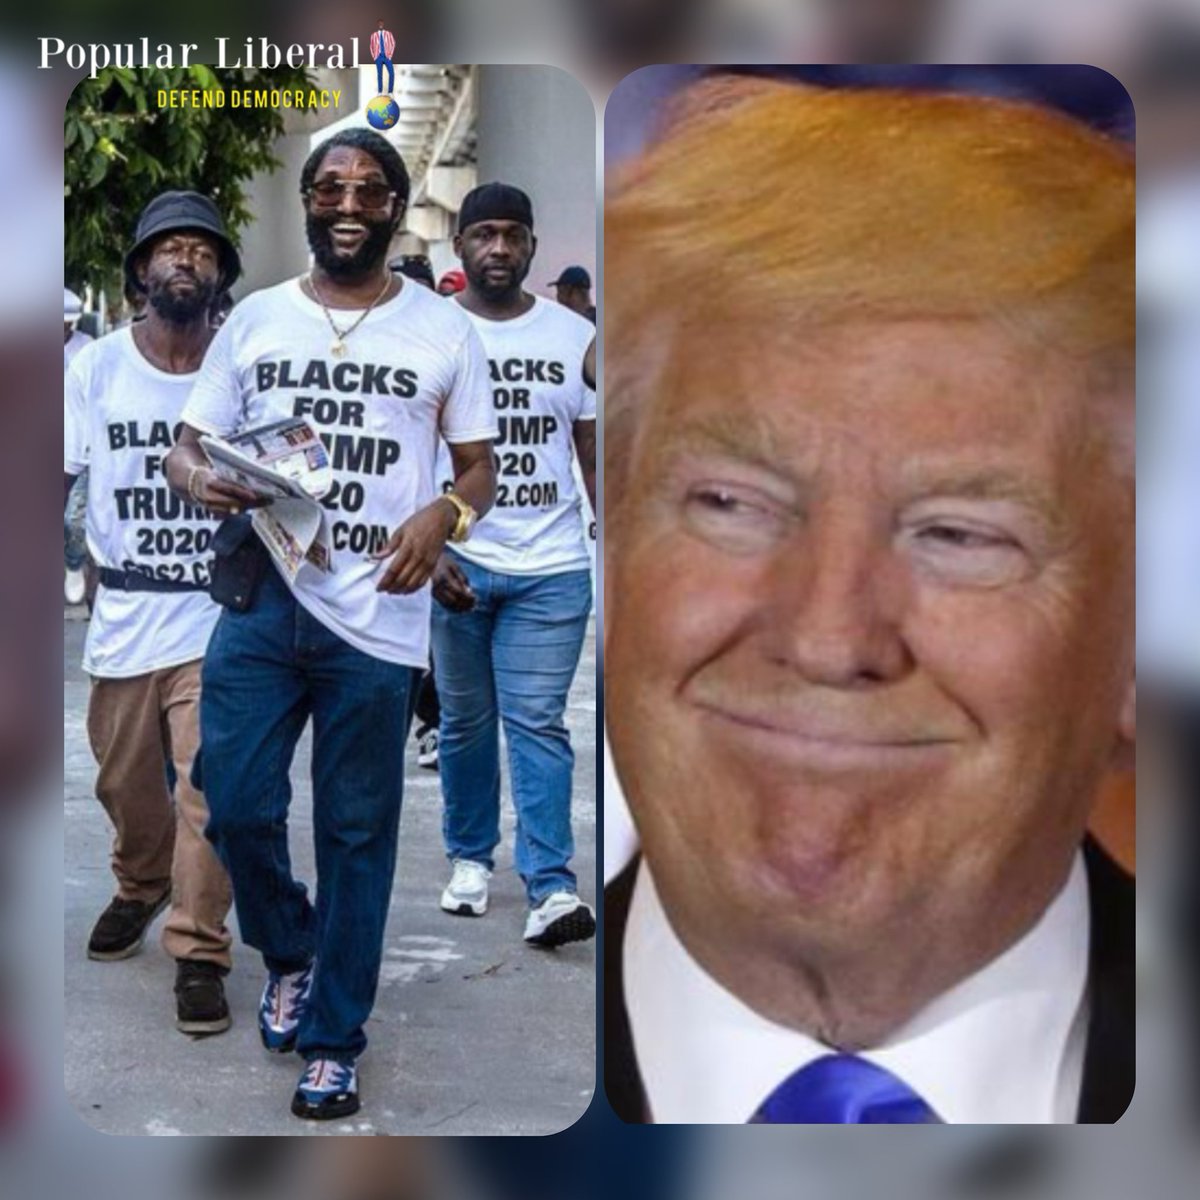 Hey Traitors: 'Blacks For Trump' is in desperate need of a merchandise overhaul, stuck in a time warp since 2015. The RNC should allocate funds to revamp its image before it becomes as obsolete as landline phones.